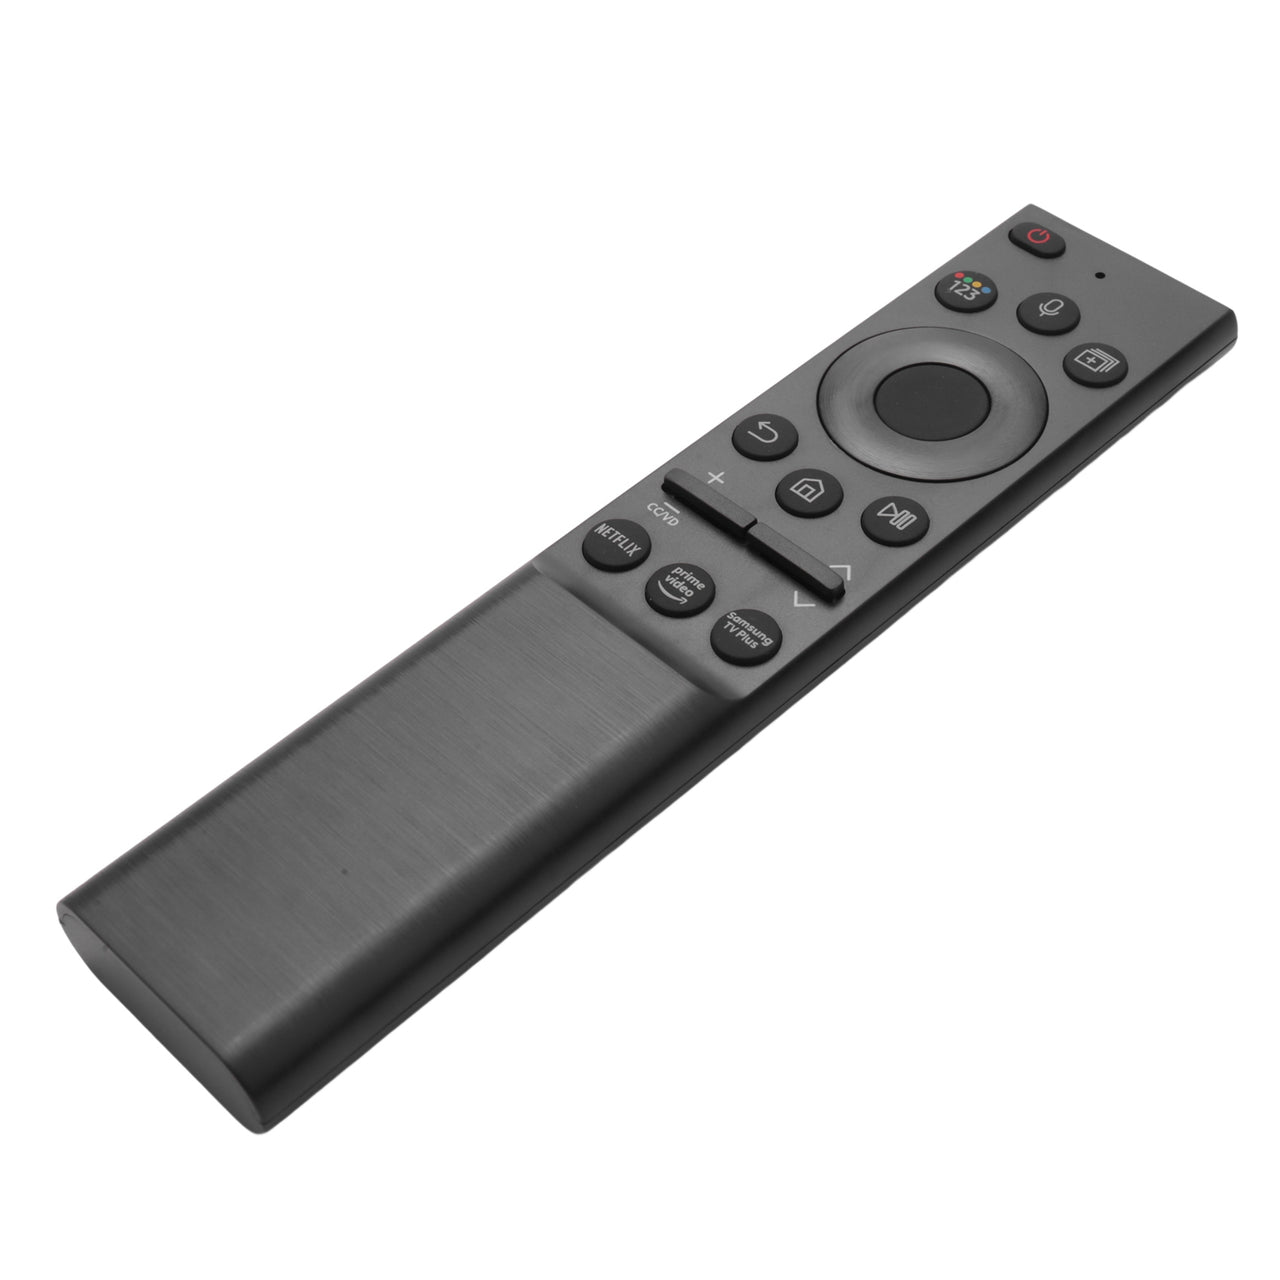 BN59-01357F Voice Replacement Remote for Samsung Televisions